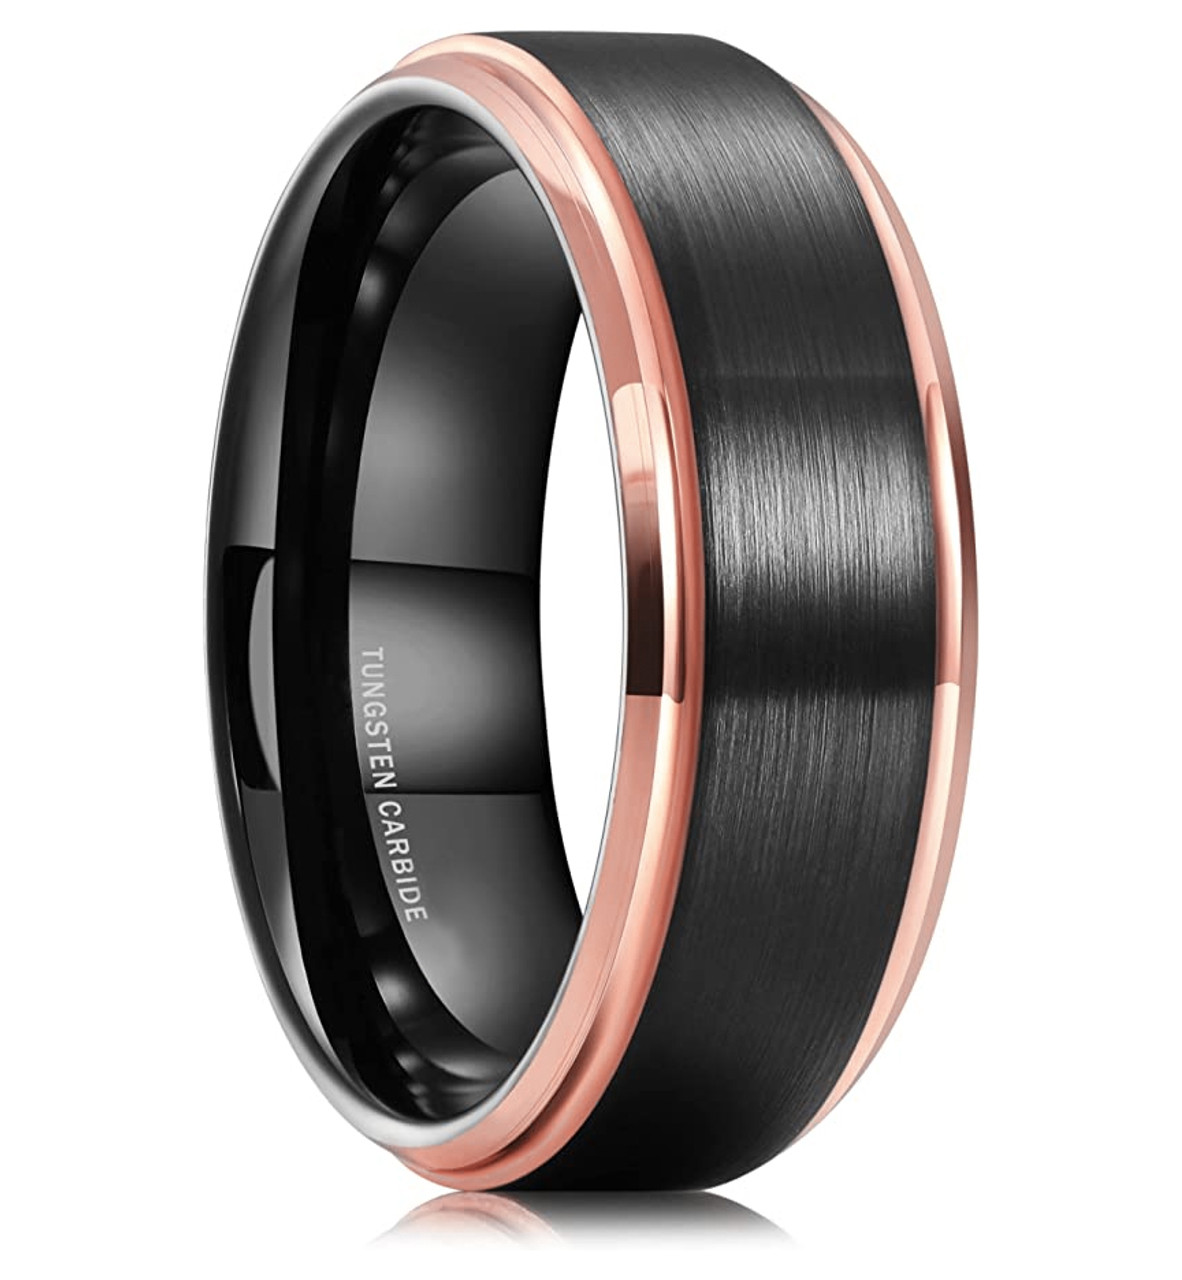 (8mm) Unisex or Men's Tungsten Carbide Wedding Ring Band. Black with Rose Gold Edge Stripes in High Polish. Comfort Fit.